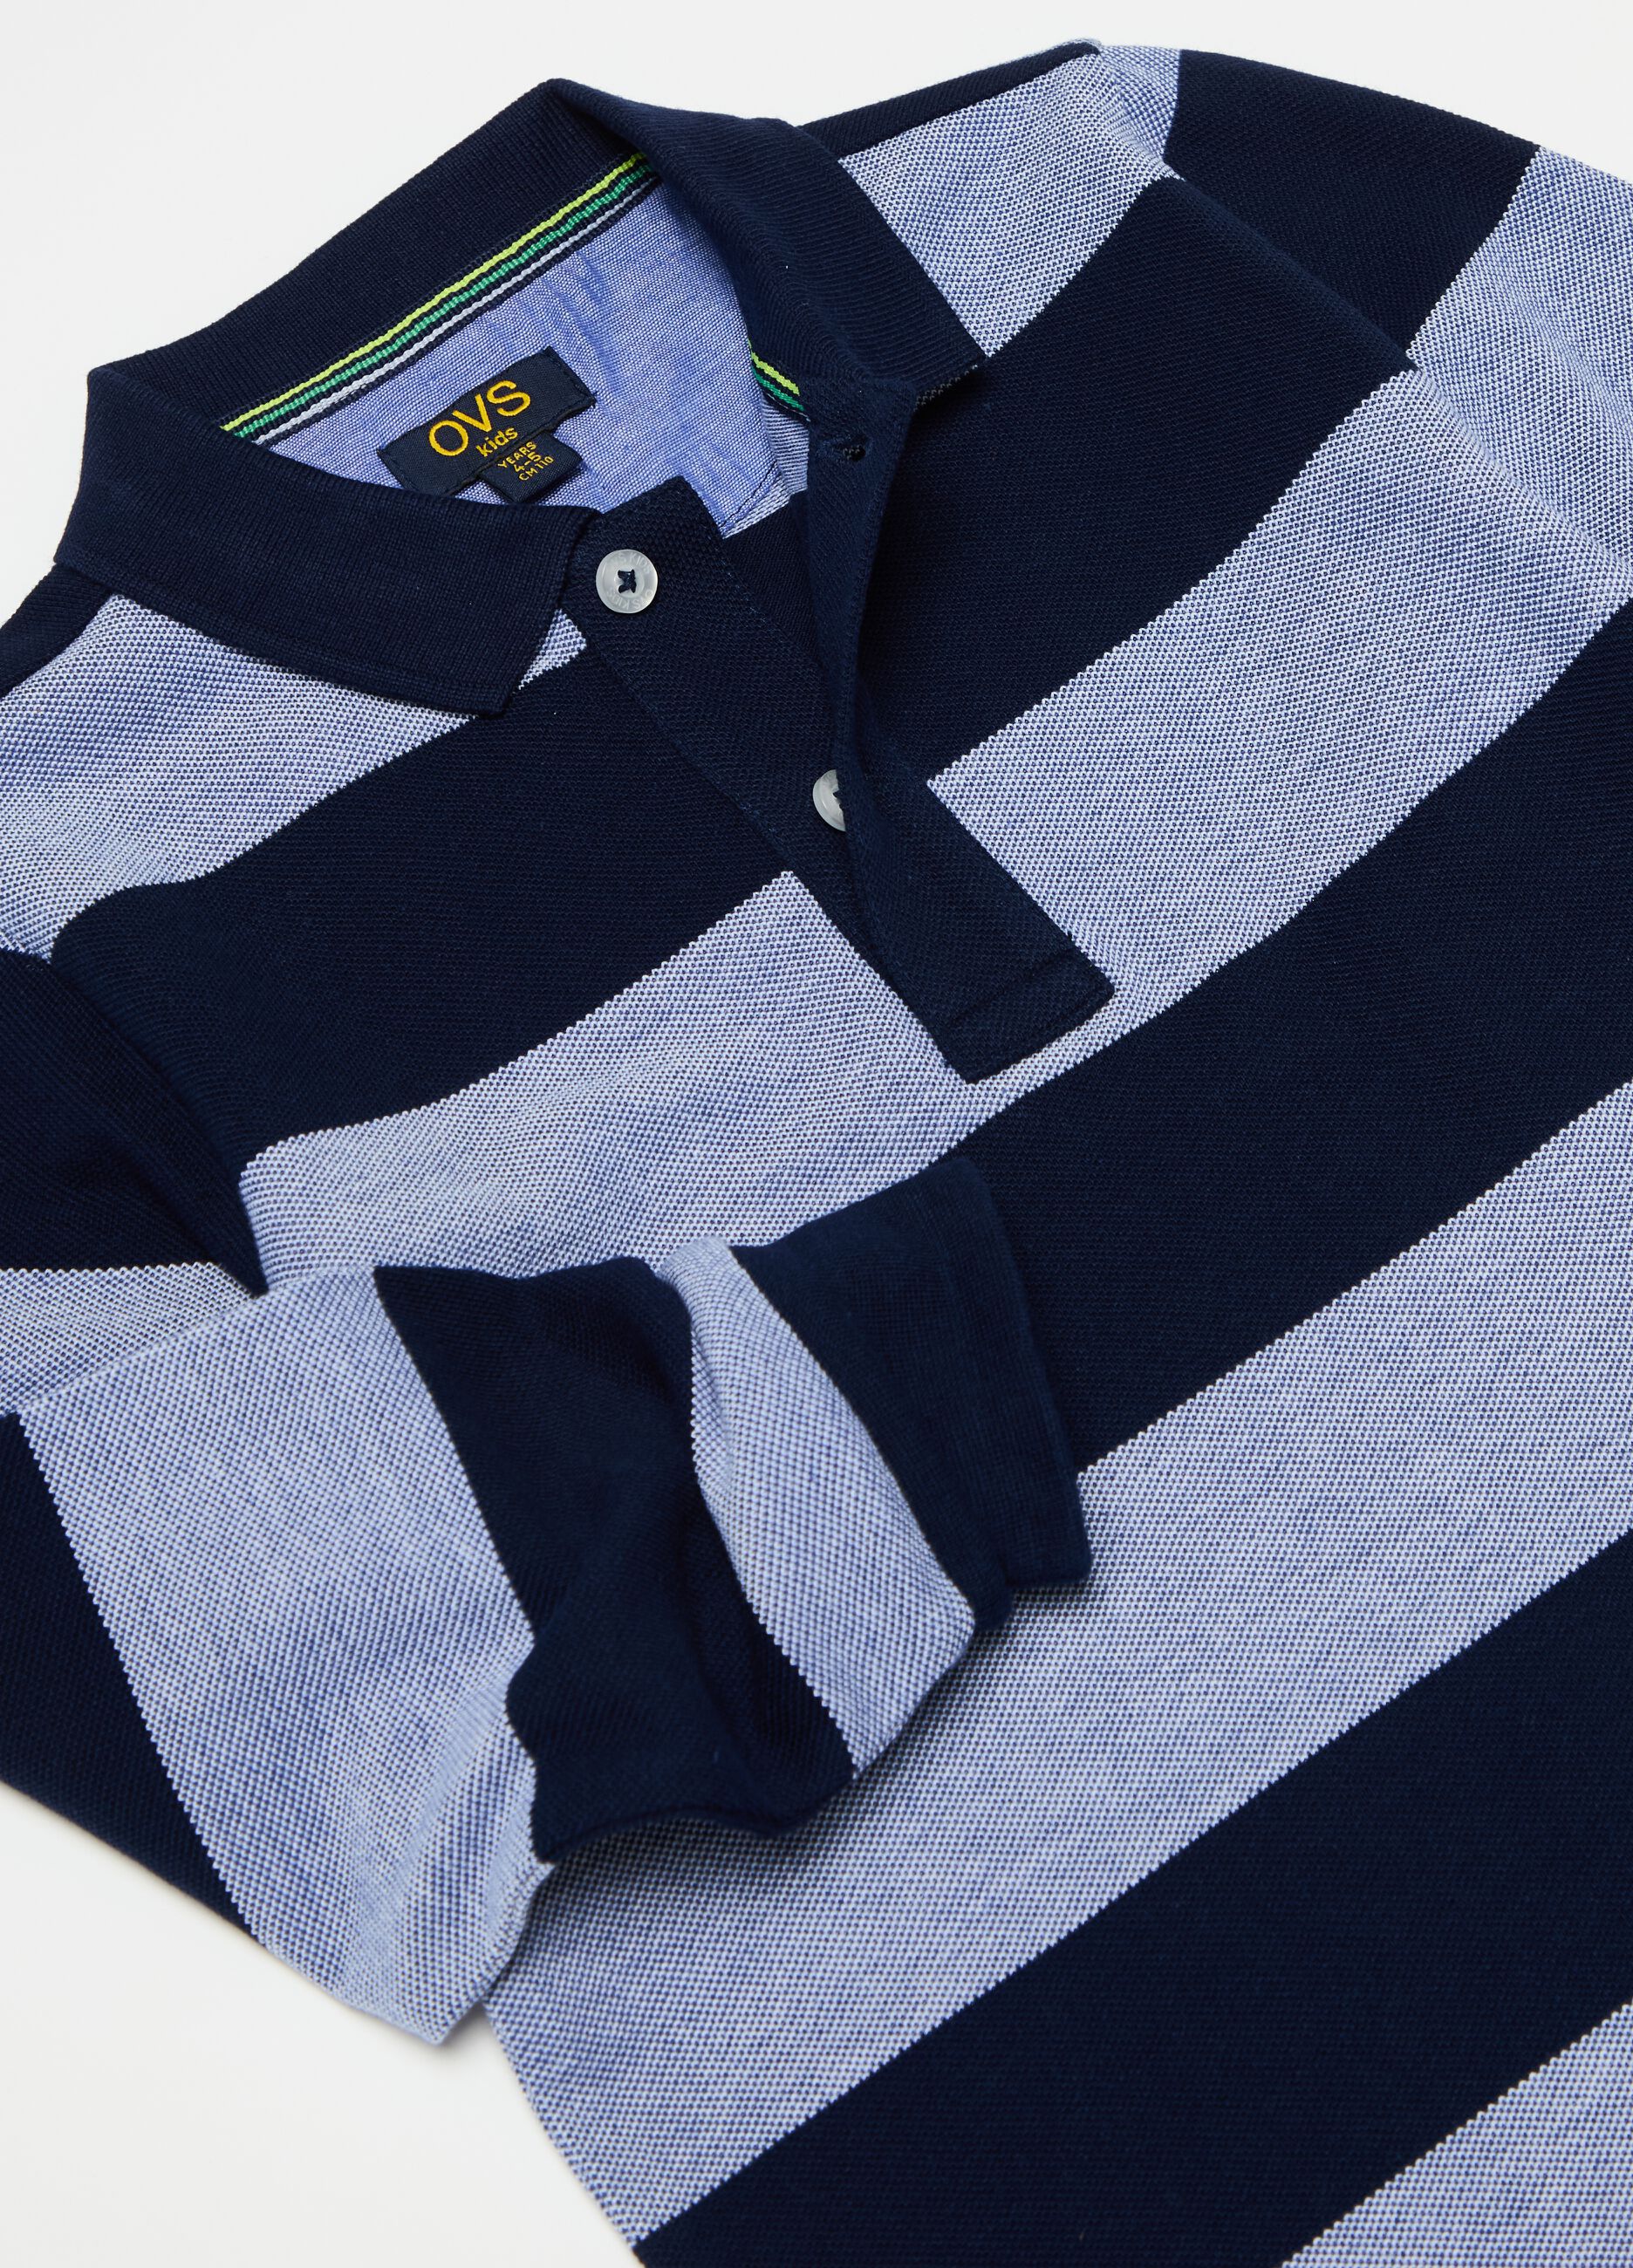 Long-sleeved polo shirt with striped pattern